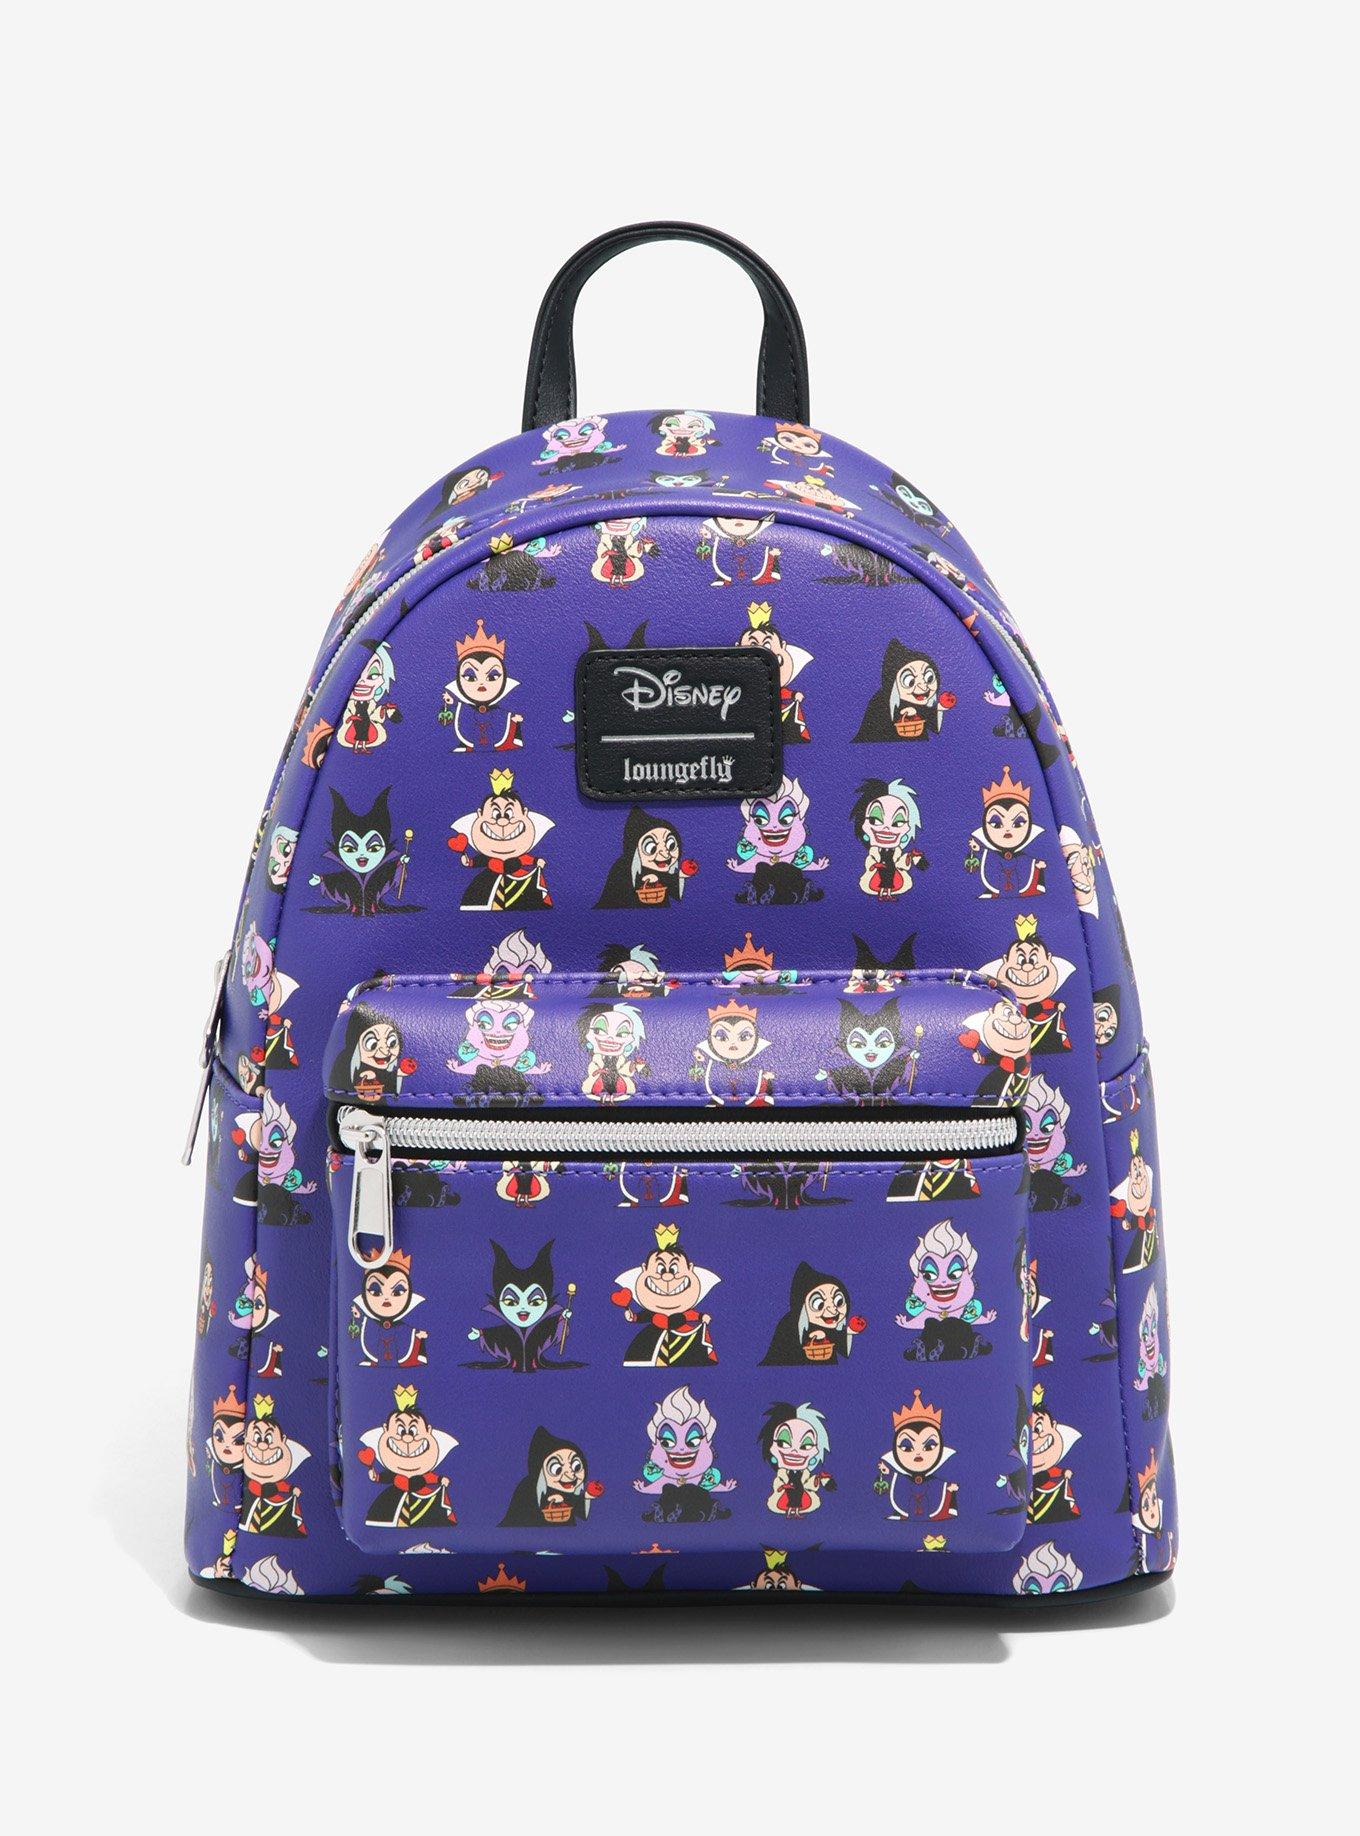 EXCLUSIVE DROP: Loungefly Disney Villains Books Tote Bag - 9/12/23 – LF  Lounge VIP